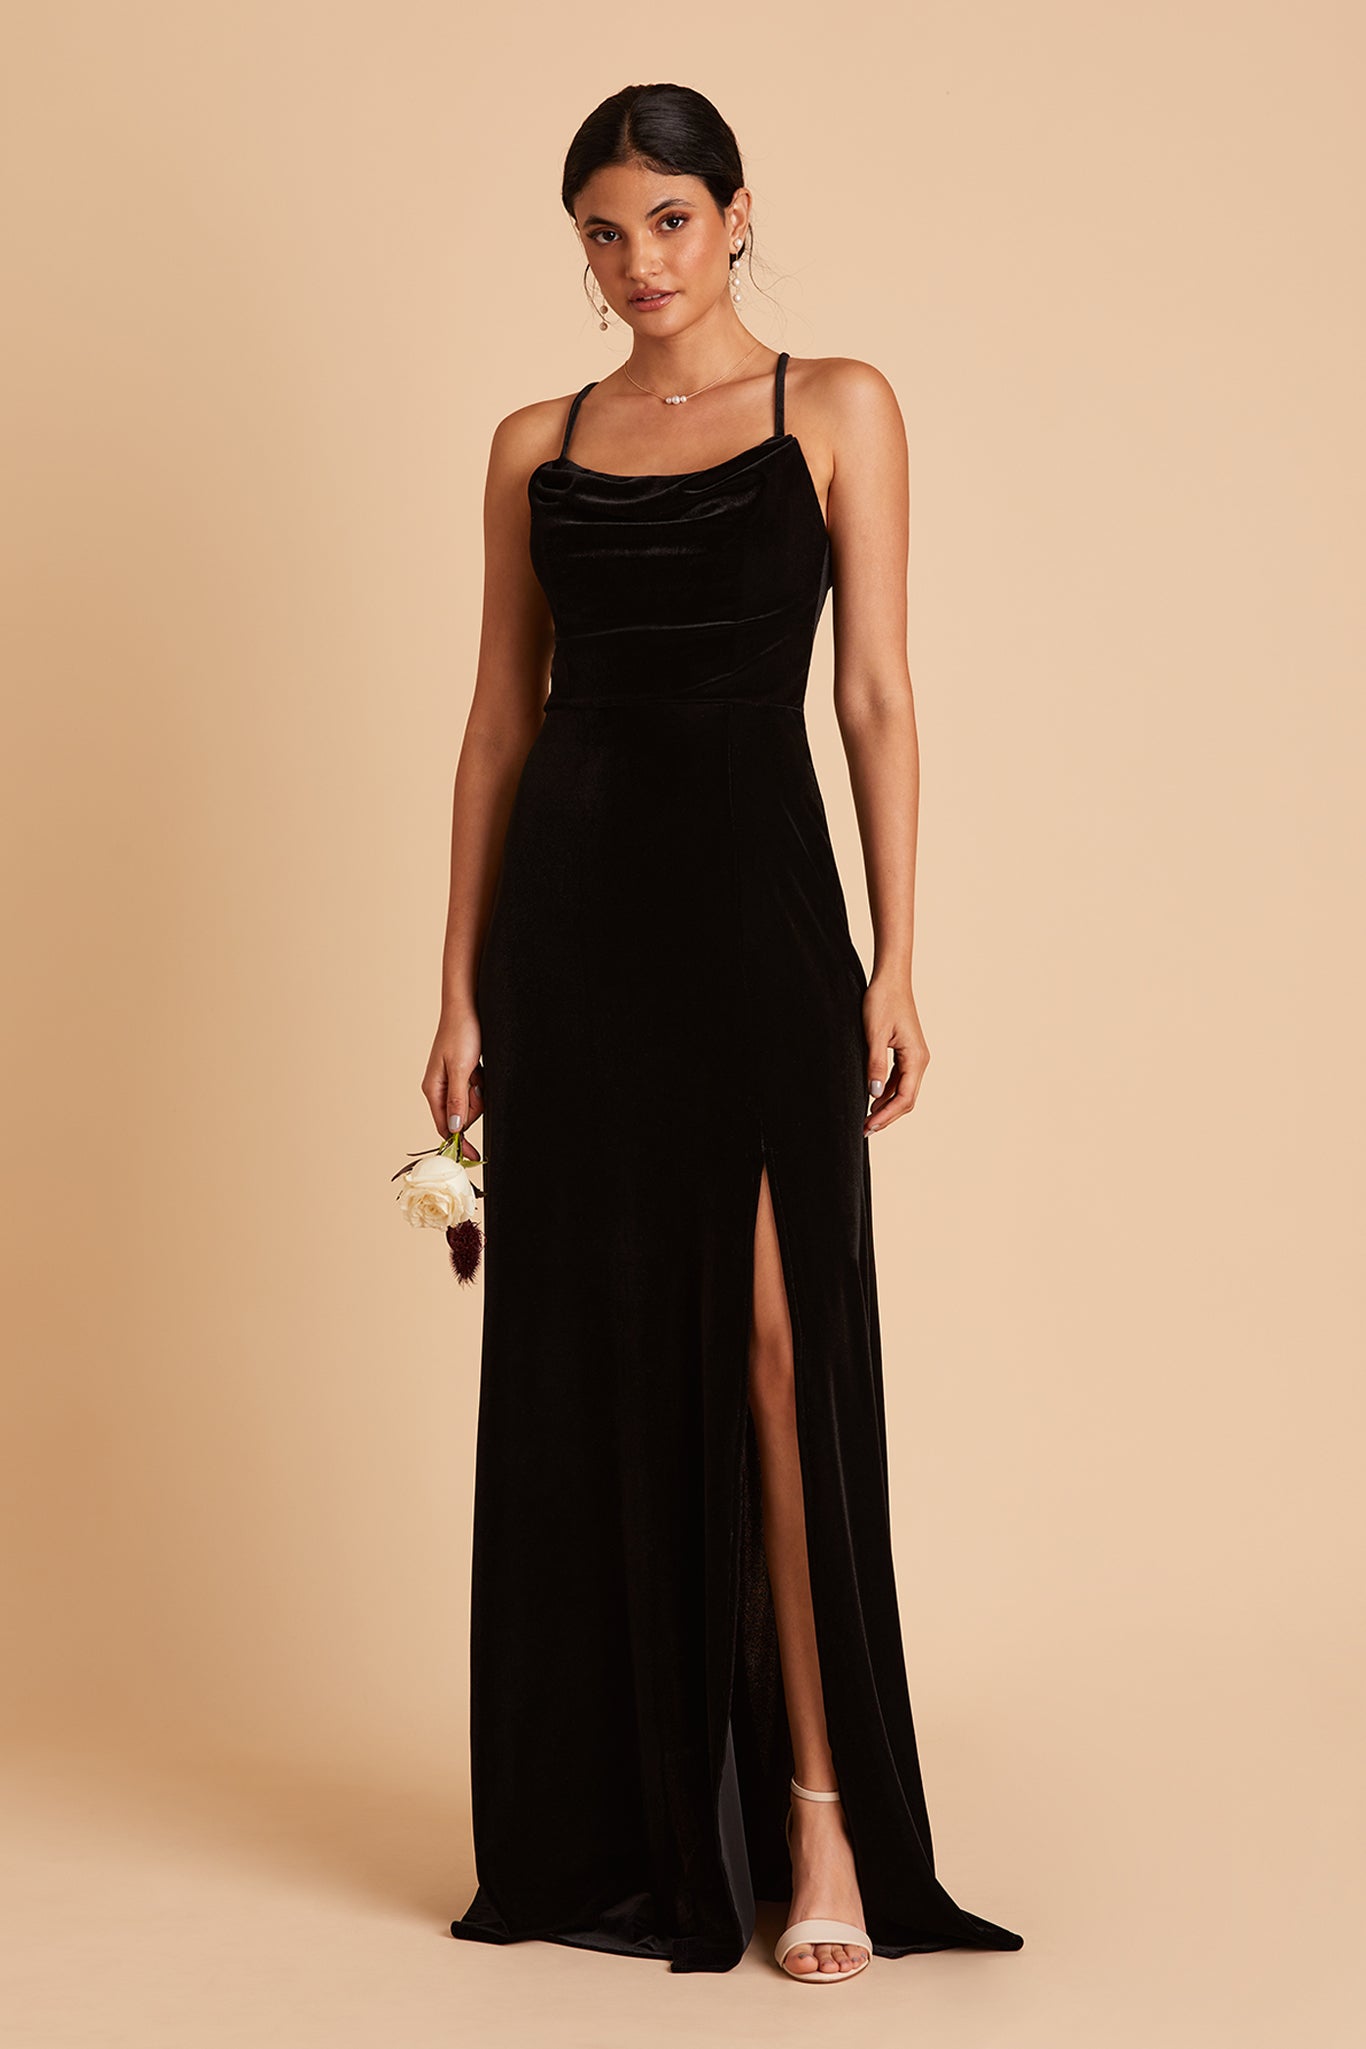 Ash bridesmaid dress with slit in black velvet by Birdy Grey, front view